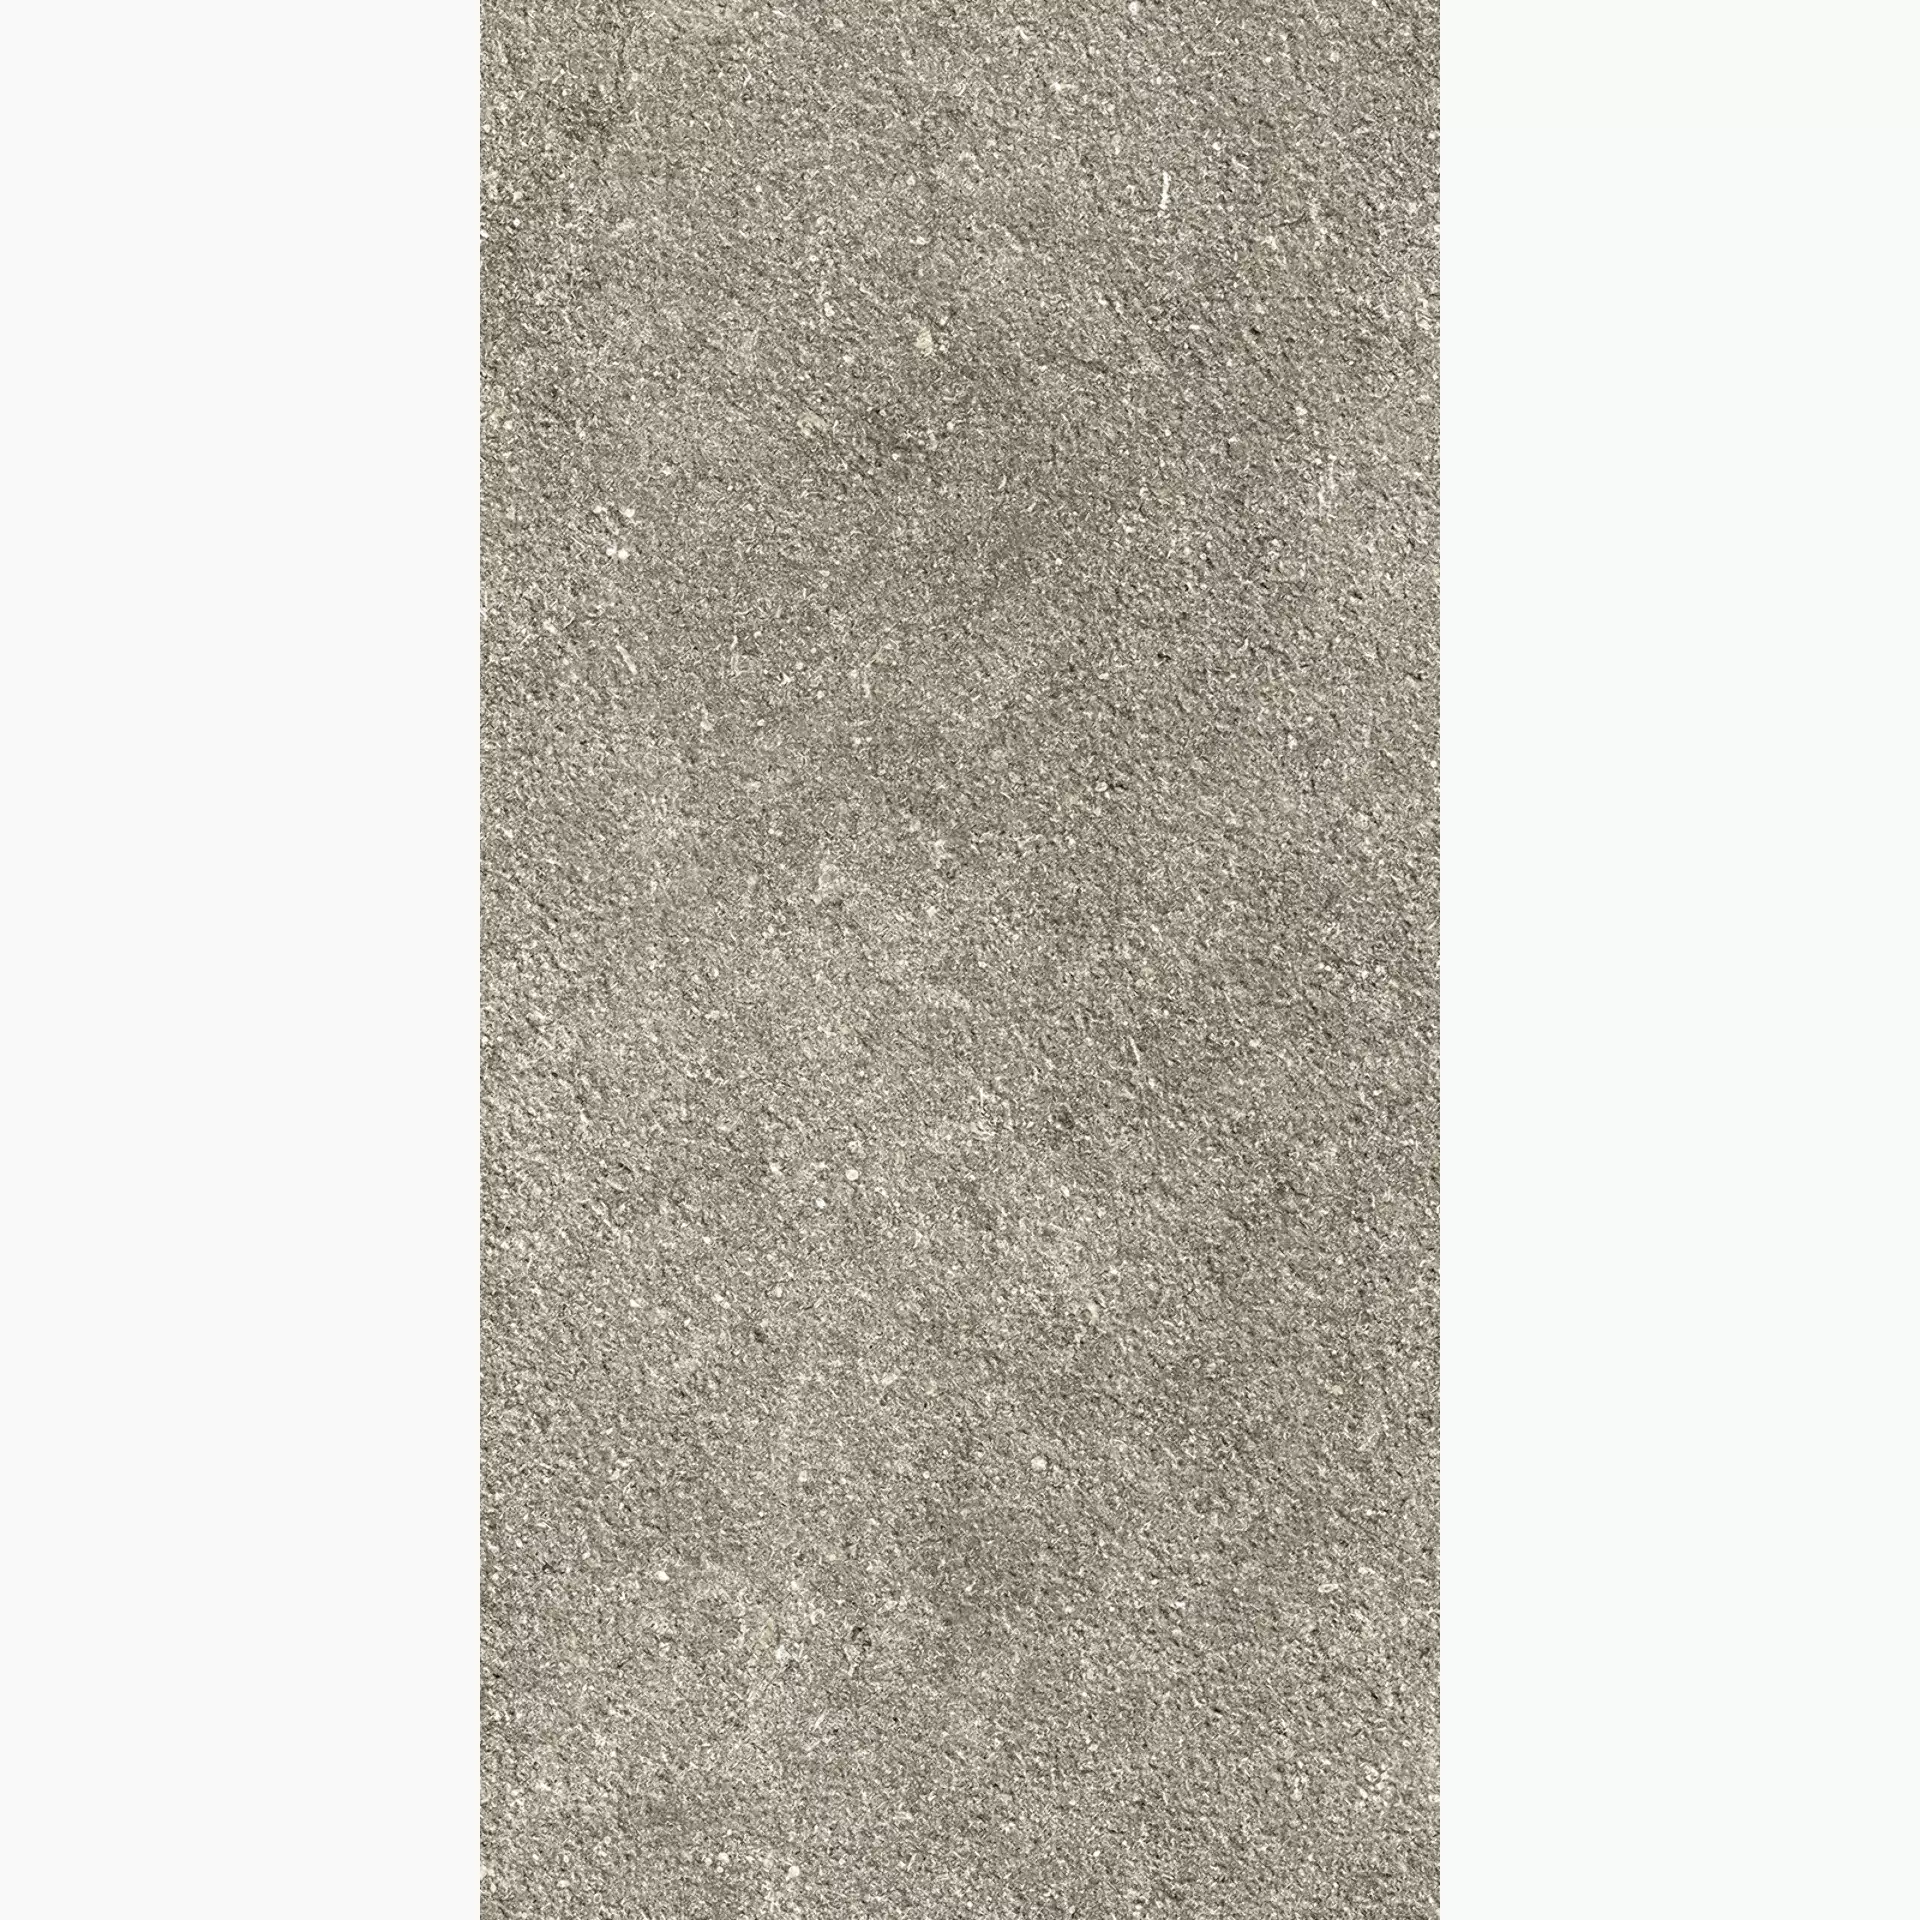 KRONOS Le Reverse Taupe Carved Naturale RS073 40x80cm rectified 9mm